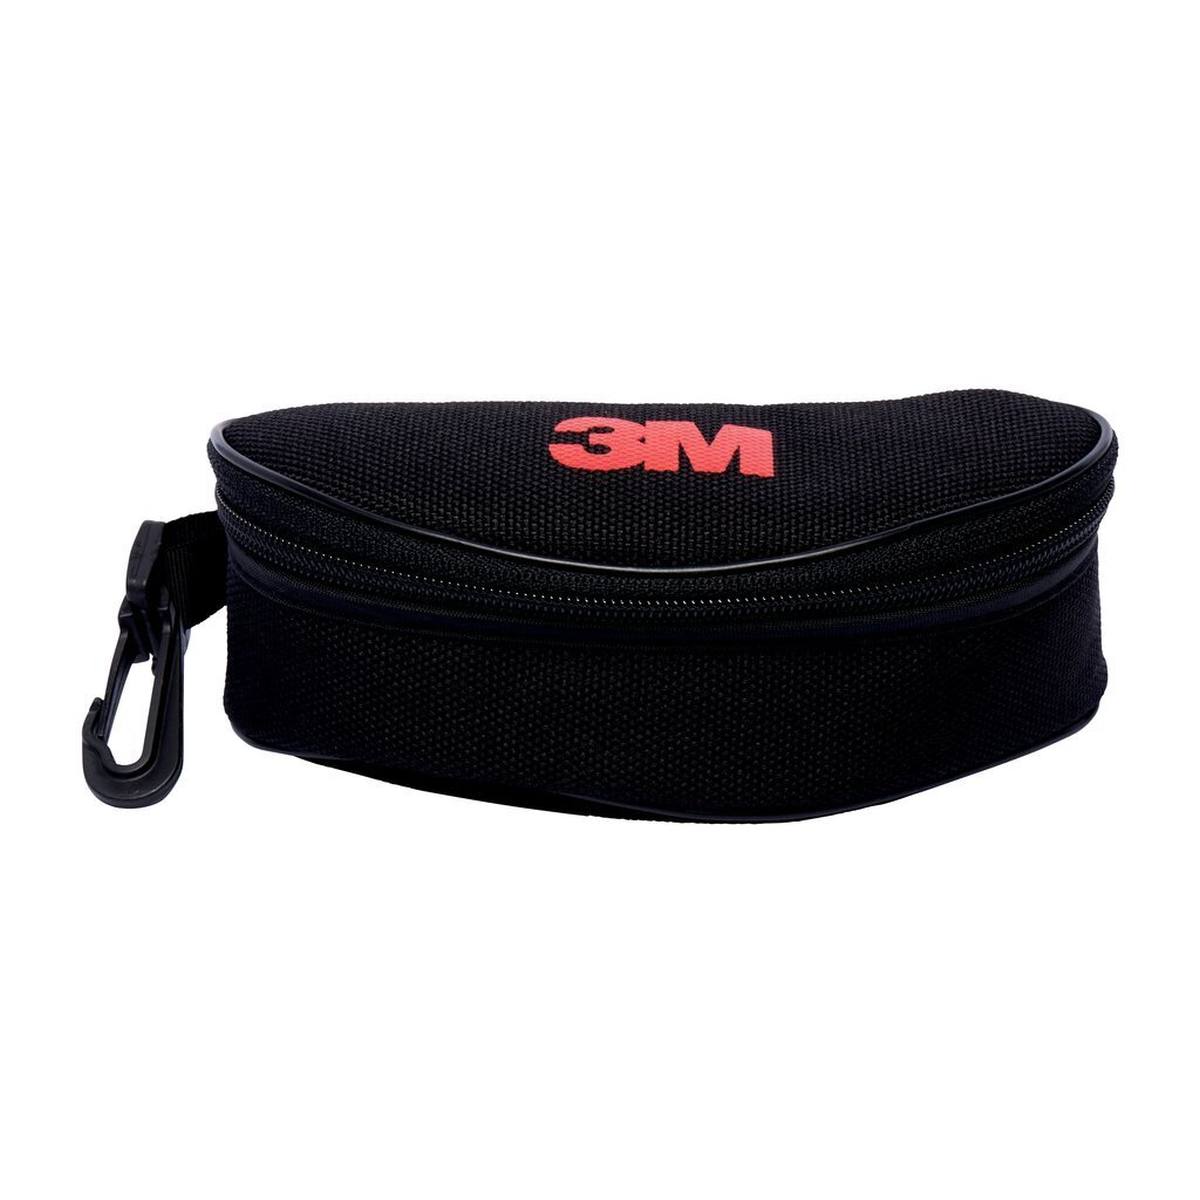 3M Soft glasses case with zip fastener, snap compartment and belt loop, black case5